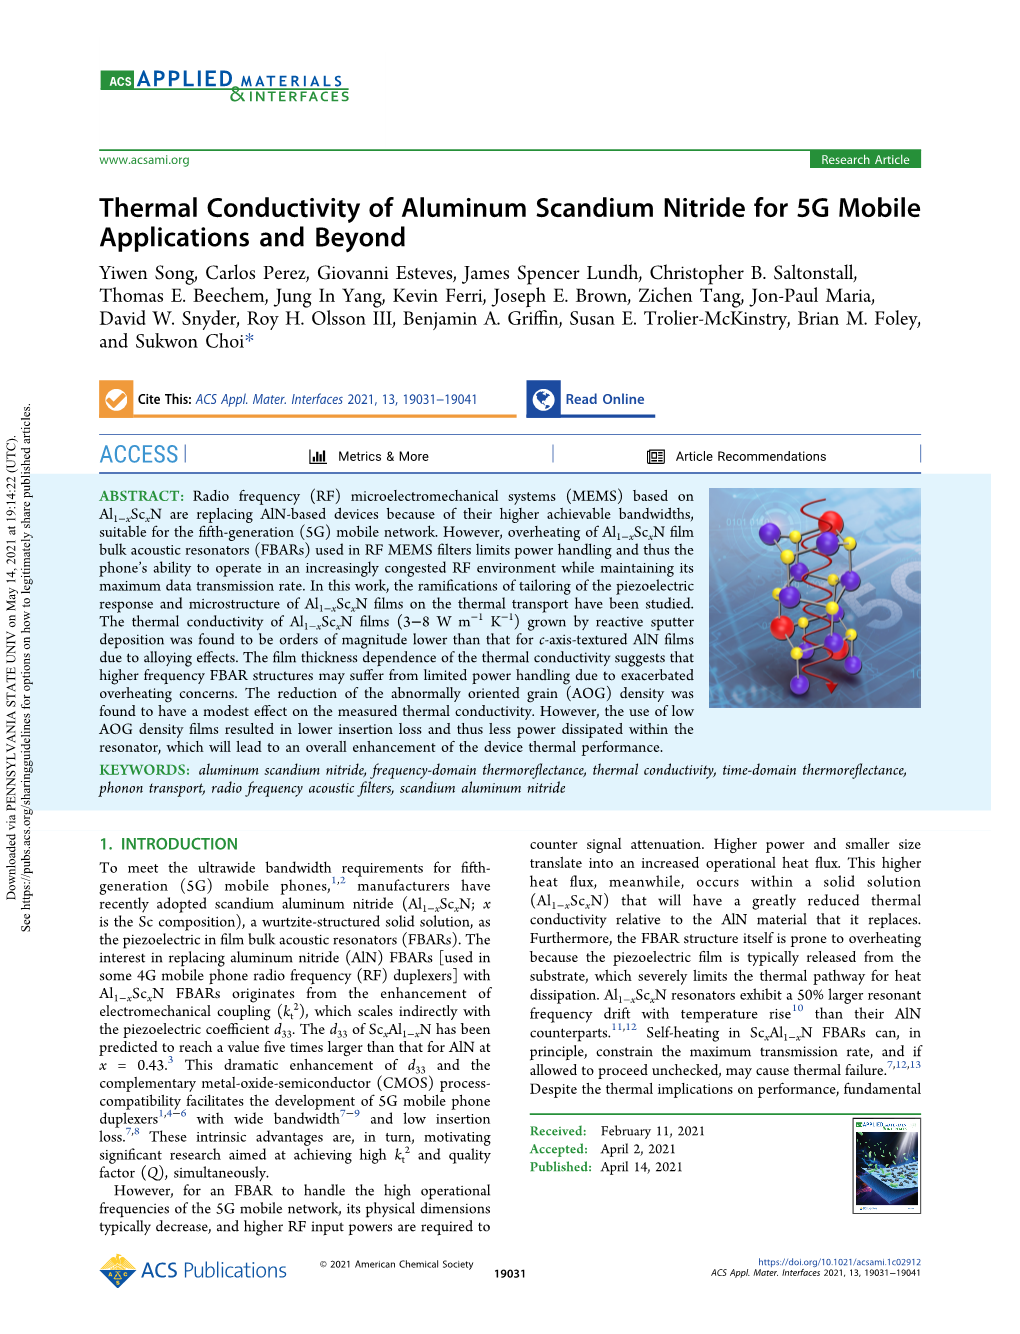 Thermal Conductivity of Aluminum Scandium Nitride for 5G Mobile Applications and Beyond Yiwen Song, Carlos Perez, Giovanni Esteves, James Spencer Lundh, Christopher B